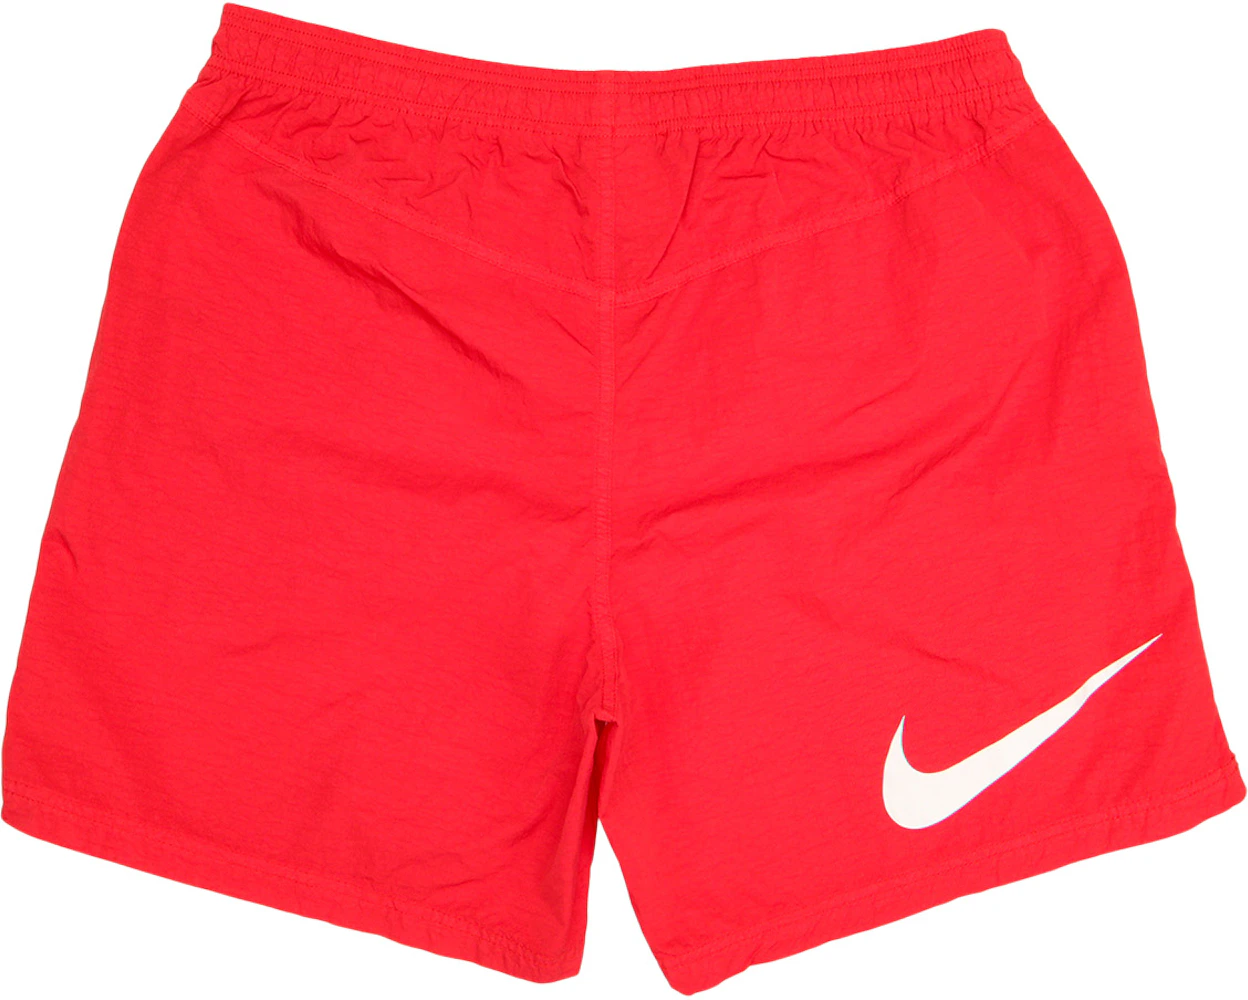 https://images.stockx.com/images/Nike-x-Stussy-Water-Short-Habanero-Red-2-Product.jpg?fit=fill&bg=FFFFFF&w=700&h=500&fm=webp&auto=compress&q=90&dpr=2&trim=color&updated_at=1688064009?height=78&width=78